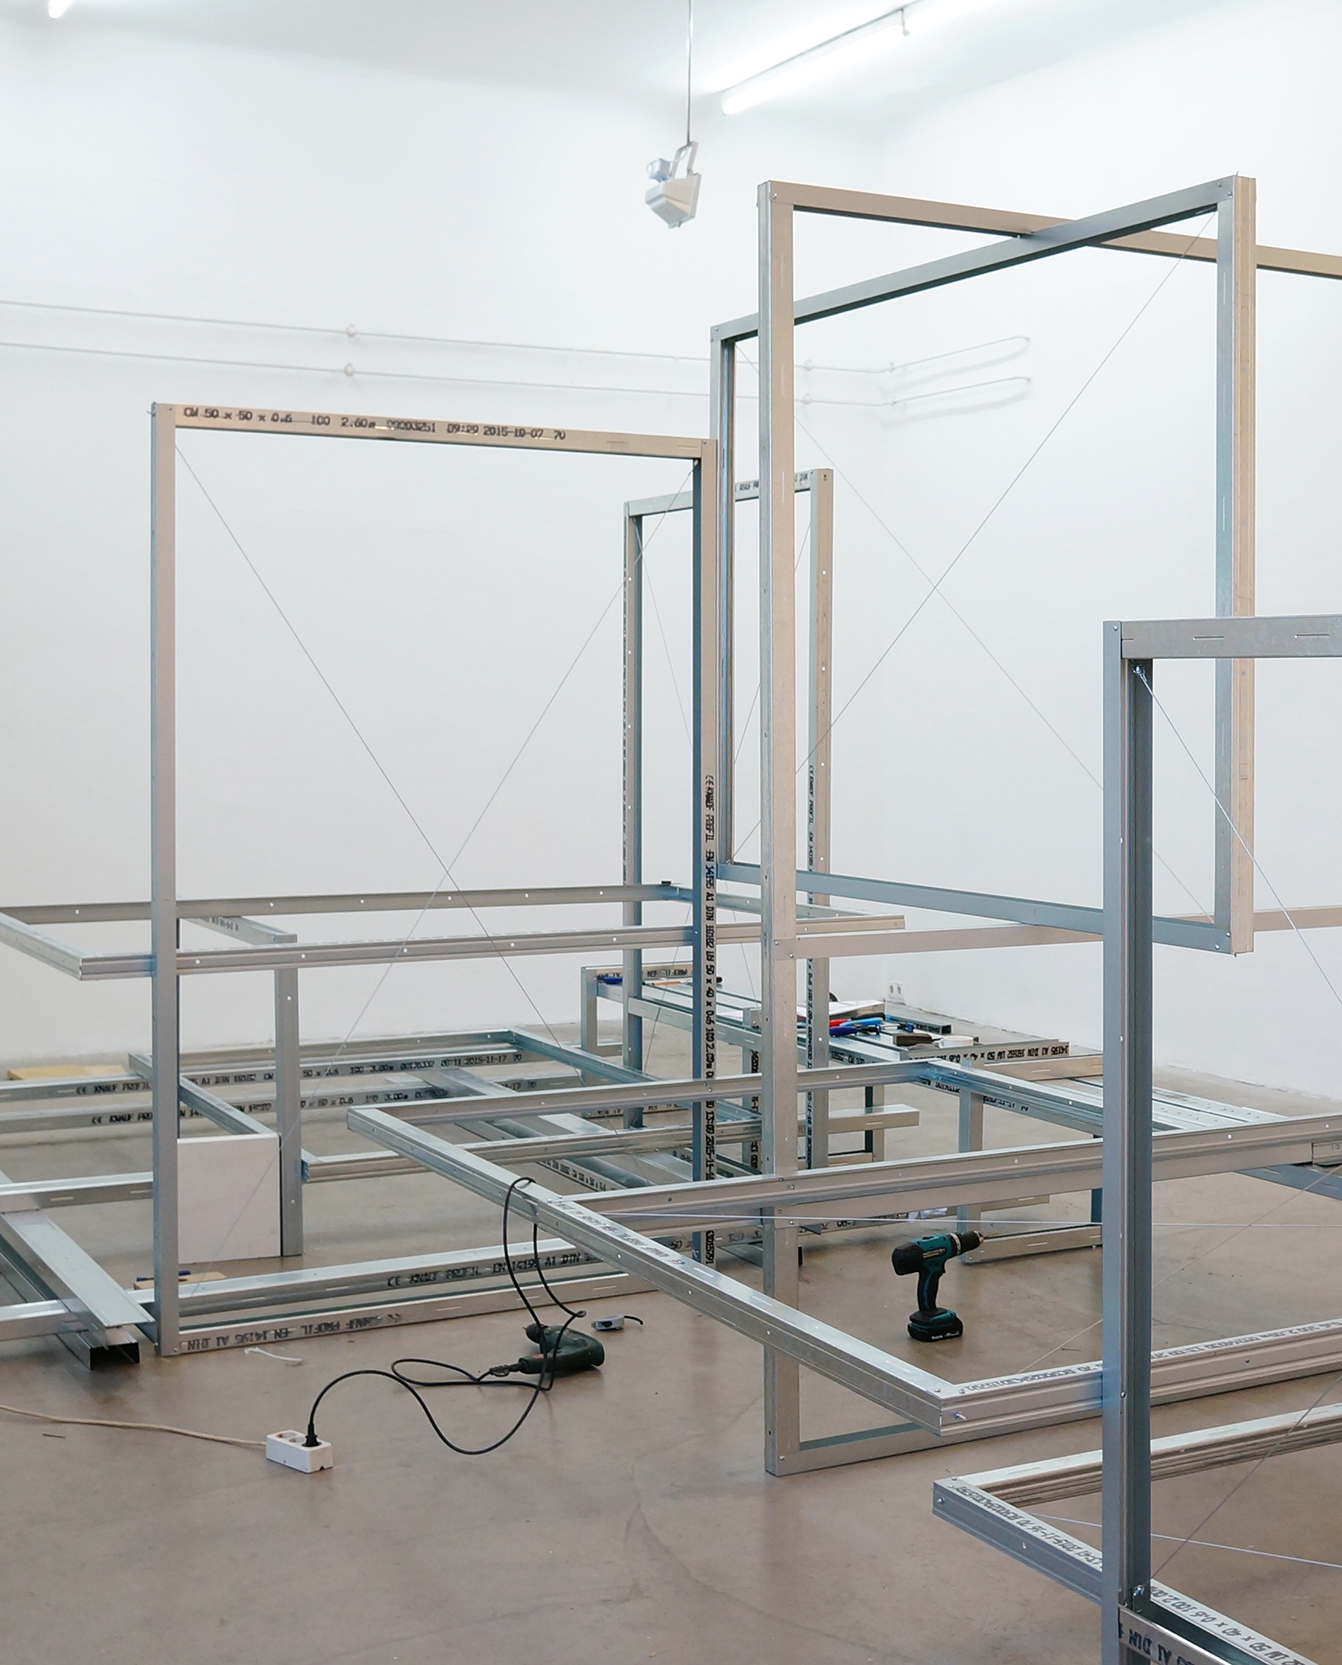 The raw construction of the exhibition display of aluminum frames that interlock to create a space-filling installation